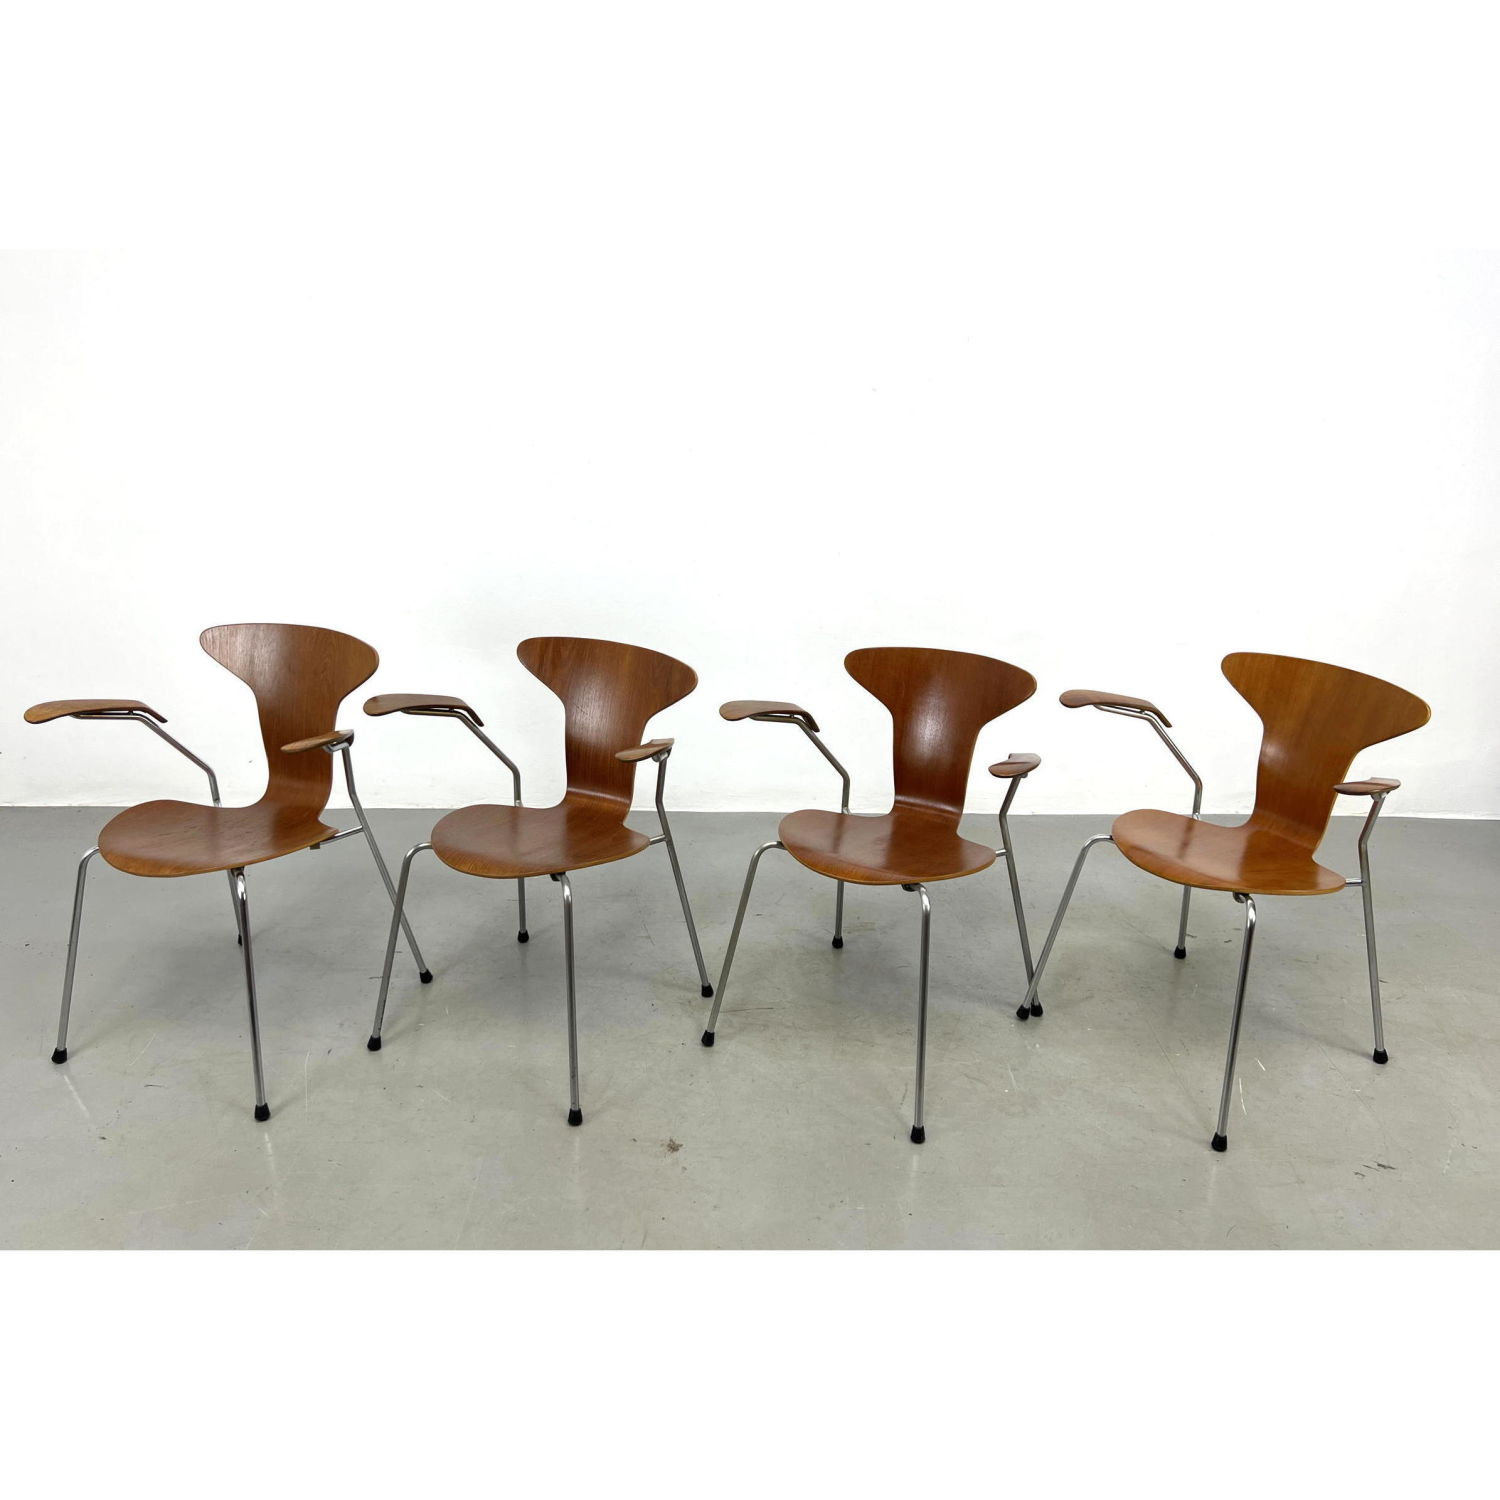 Set 4 Early Arne Jacobsen Arm Chairs.